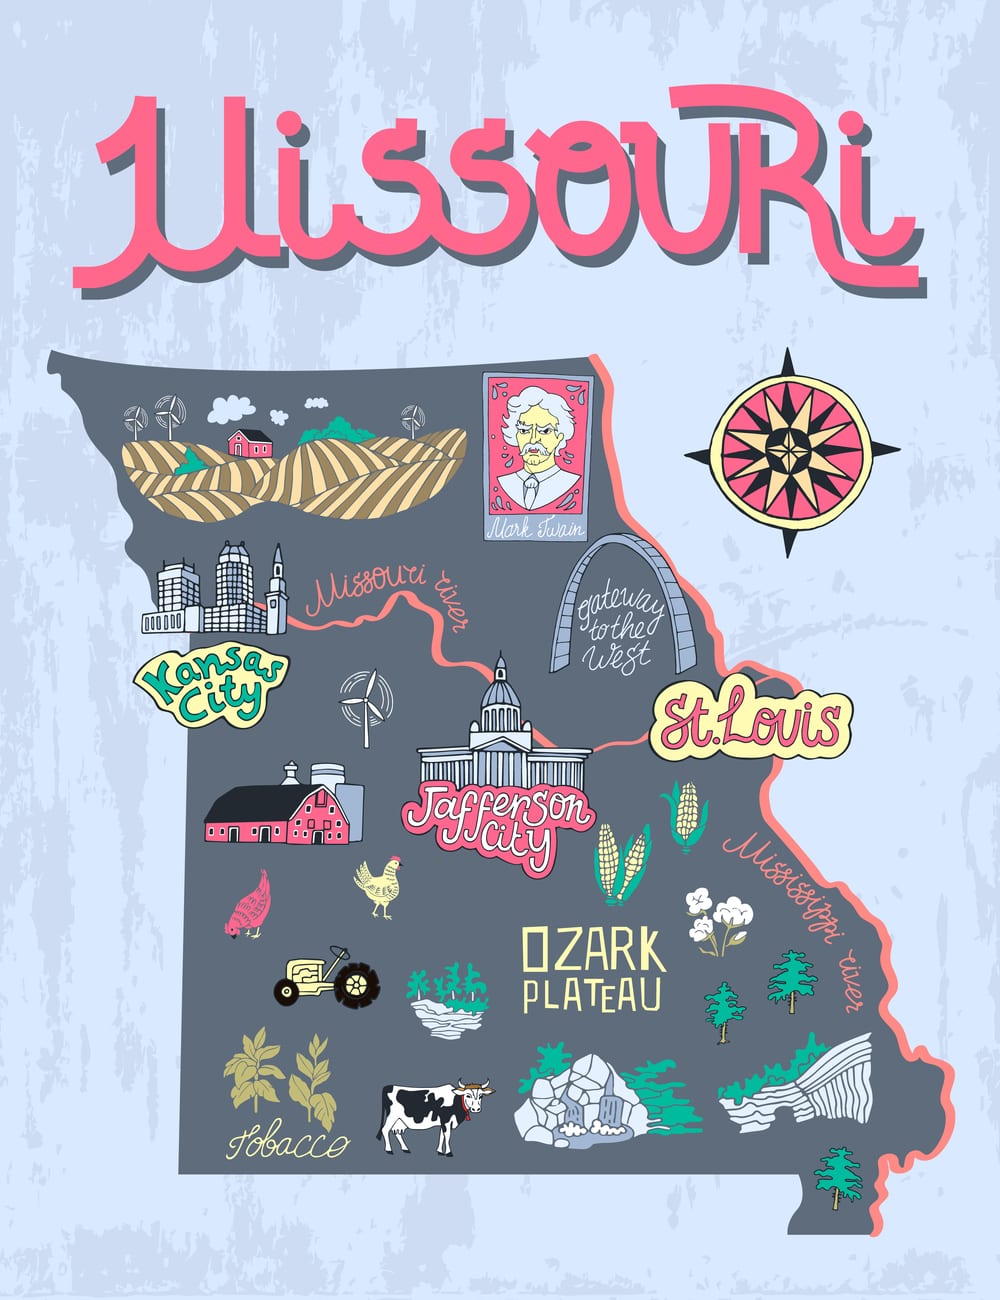 Illustrated map of Missouri, USA. Travel and attractions